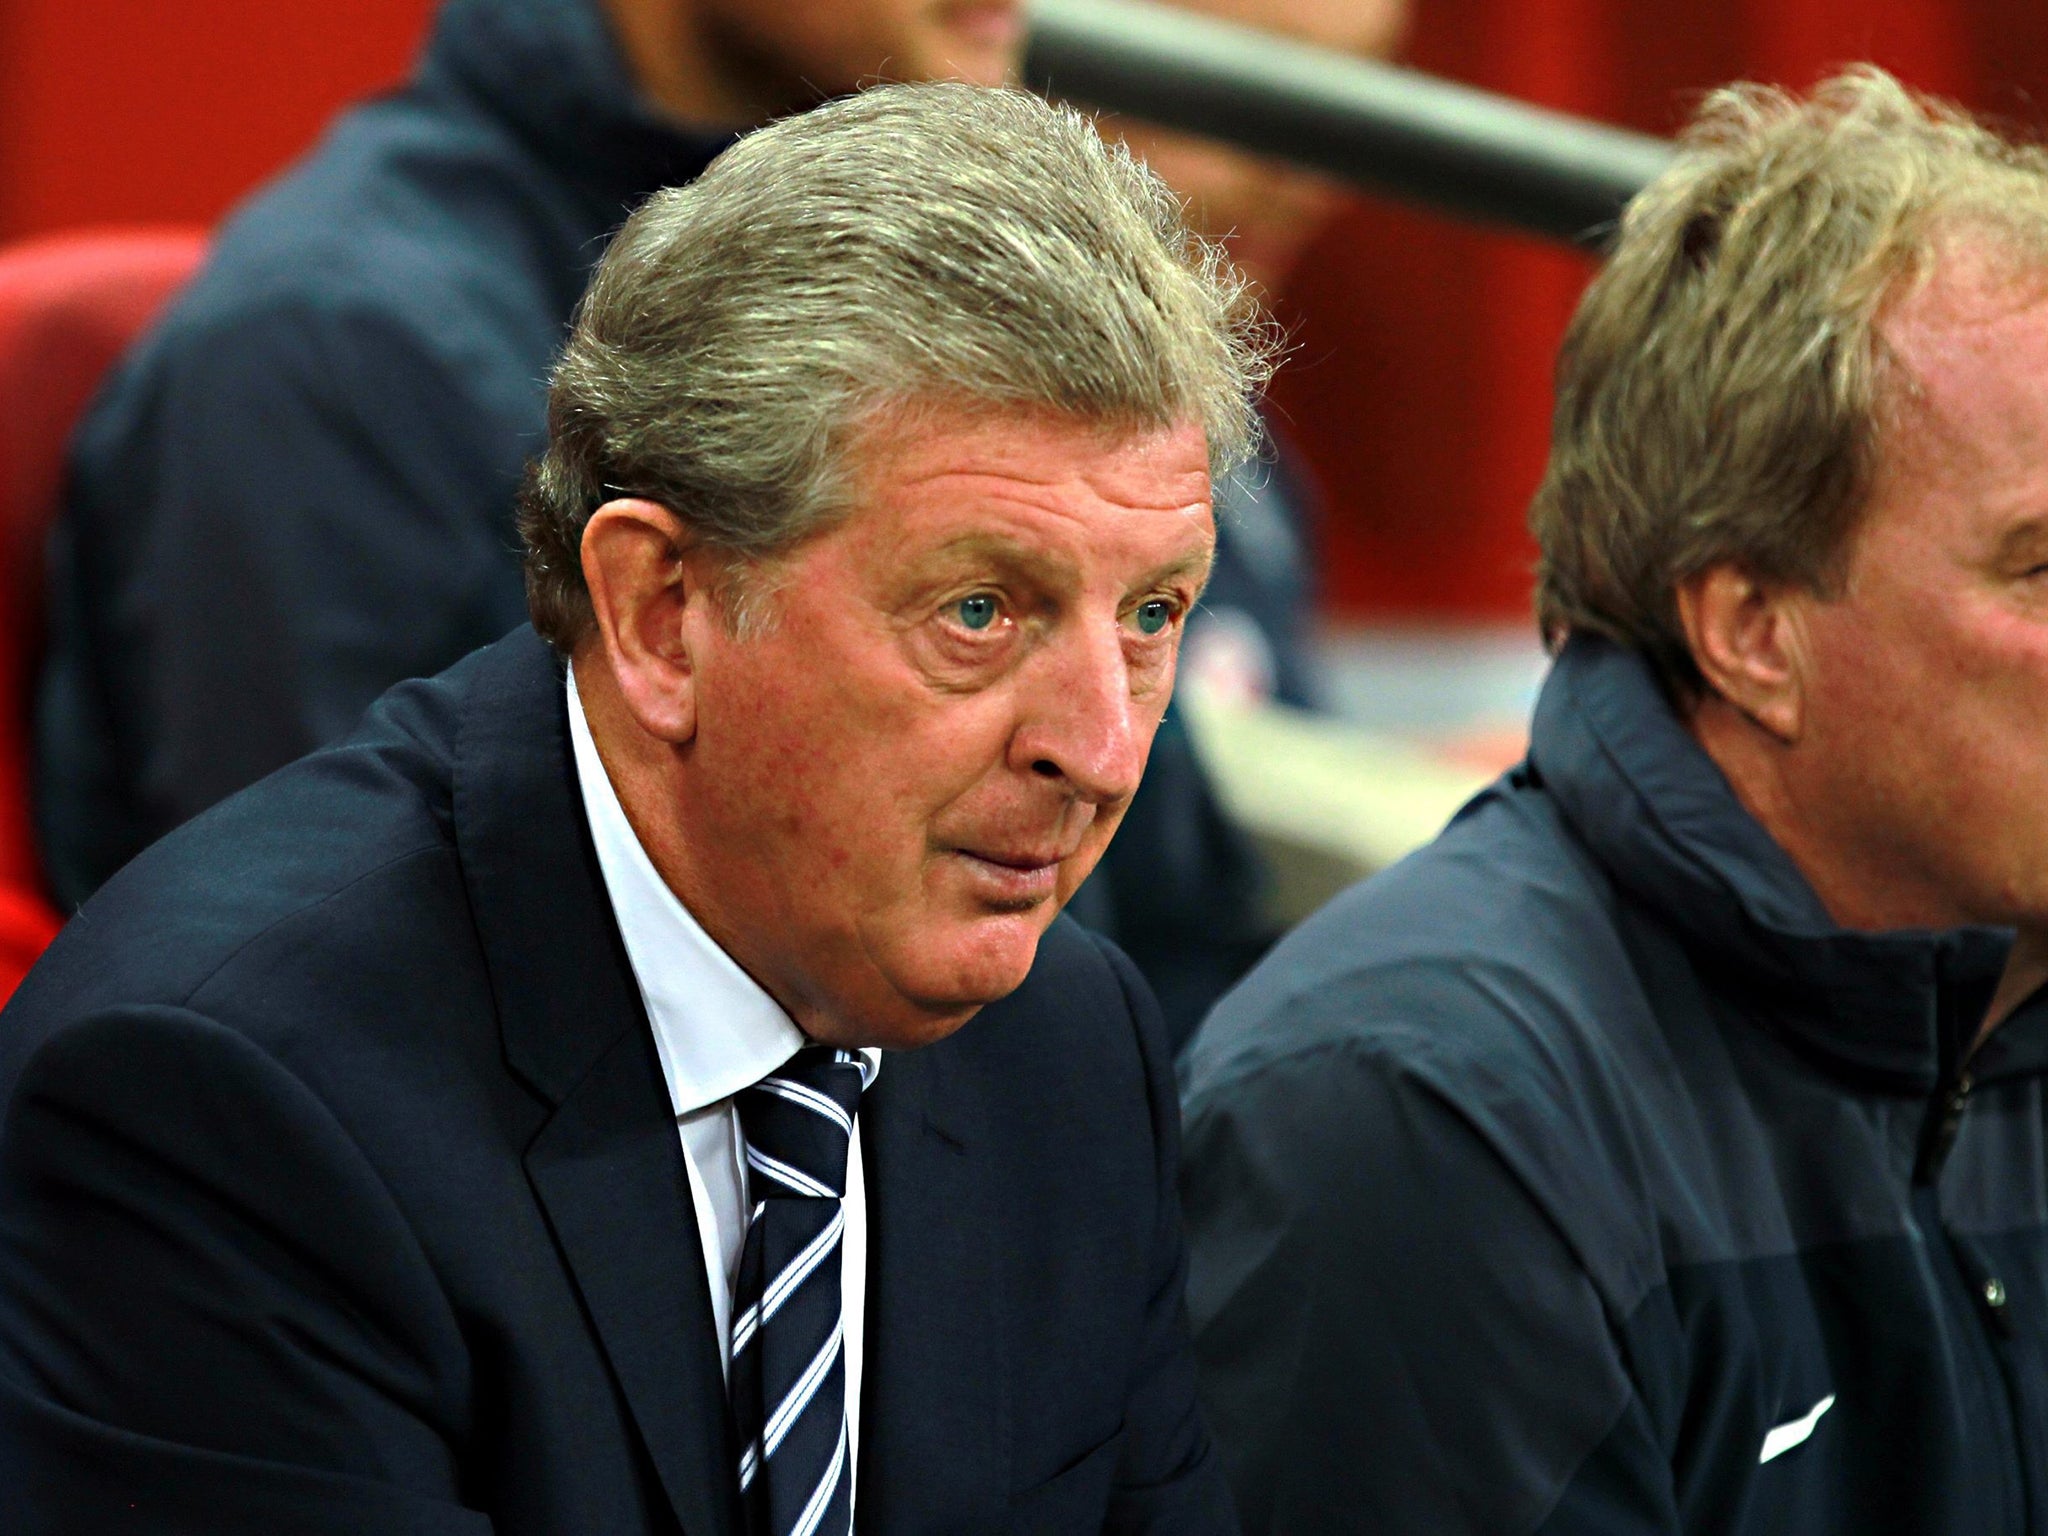 Roy Hodgson launched his most outspoken defence yet of his young England team